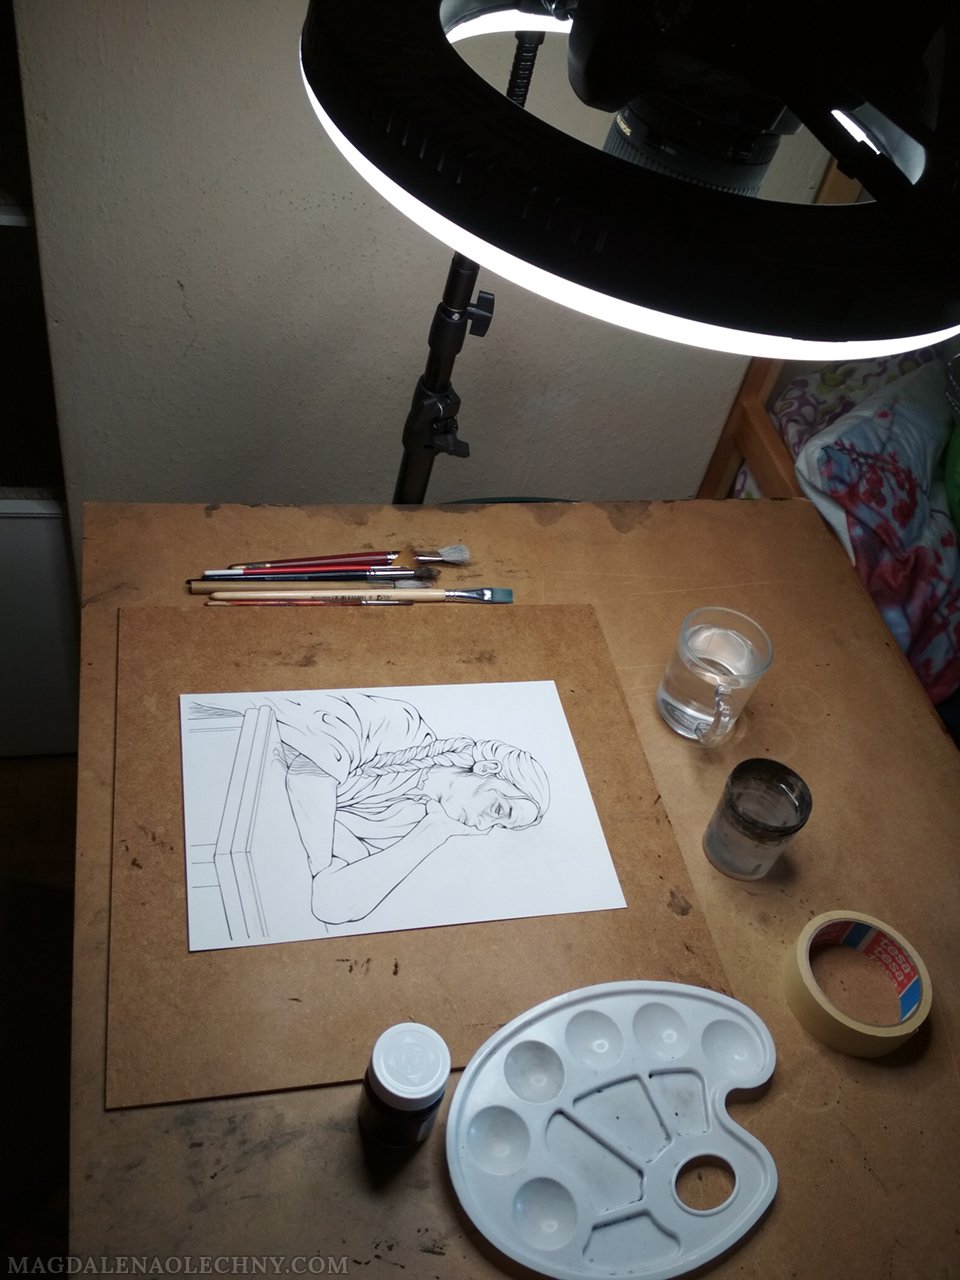 A workspace for creating and filming traditional art.